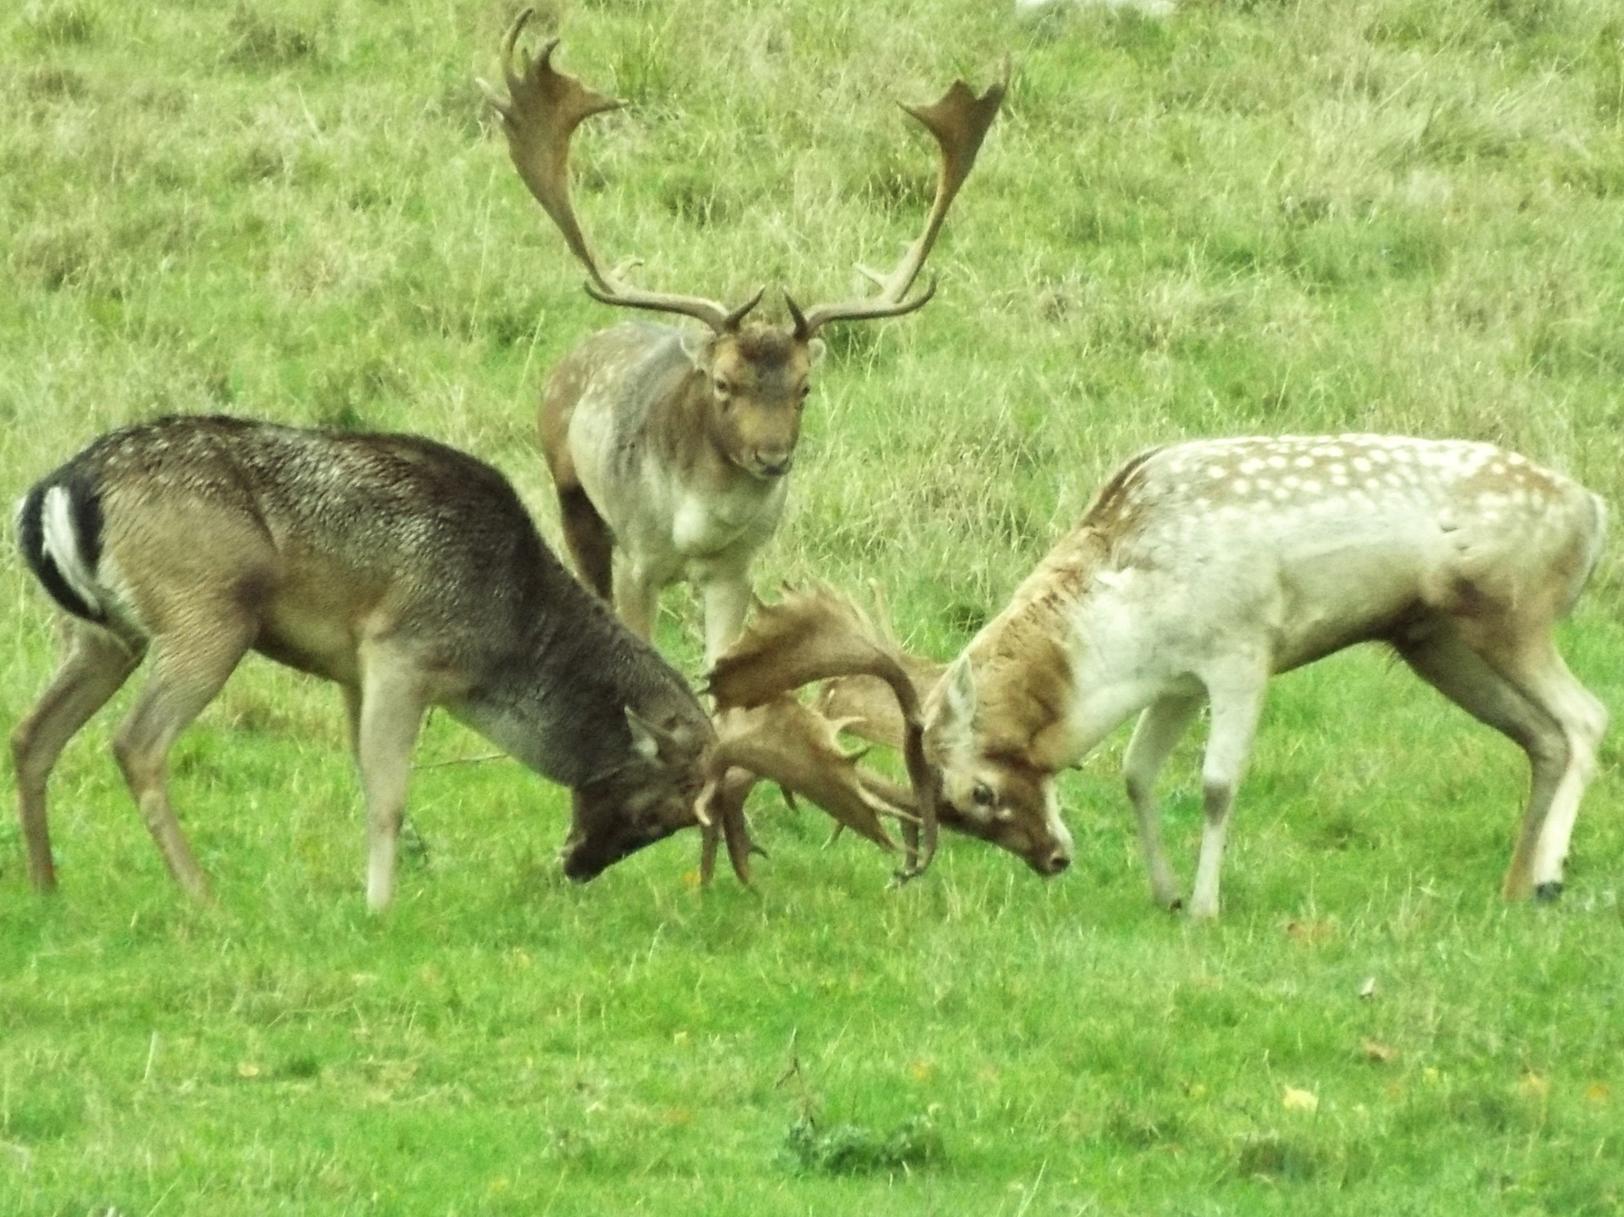 Deer rutting at Charlecote Park. Photo by Marion W Stafford.